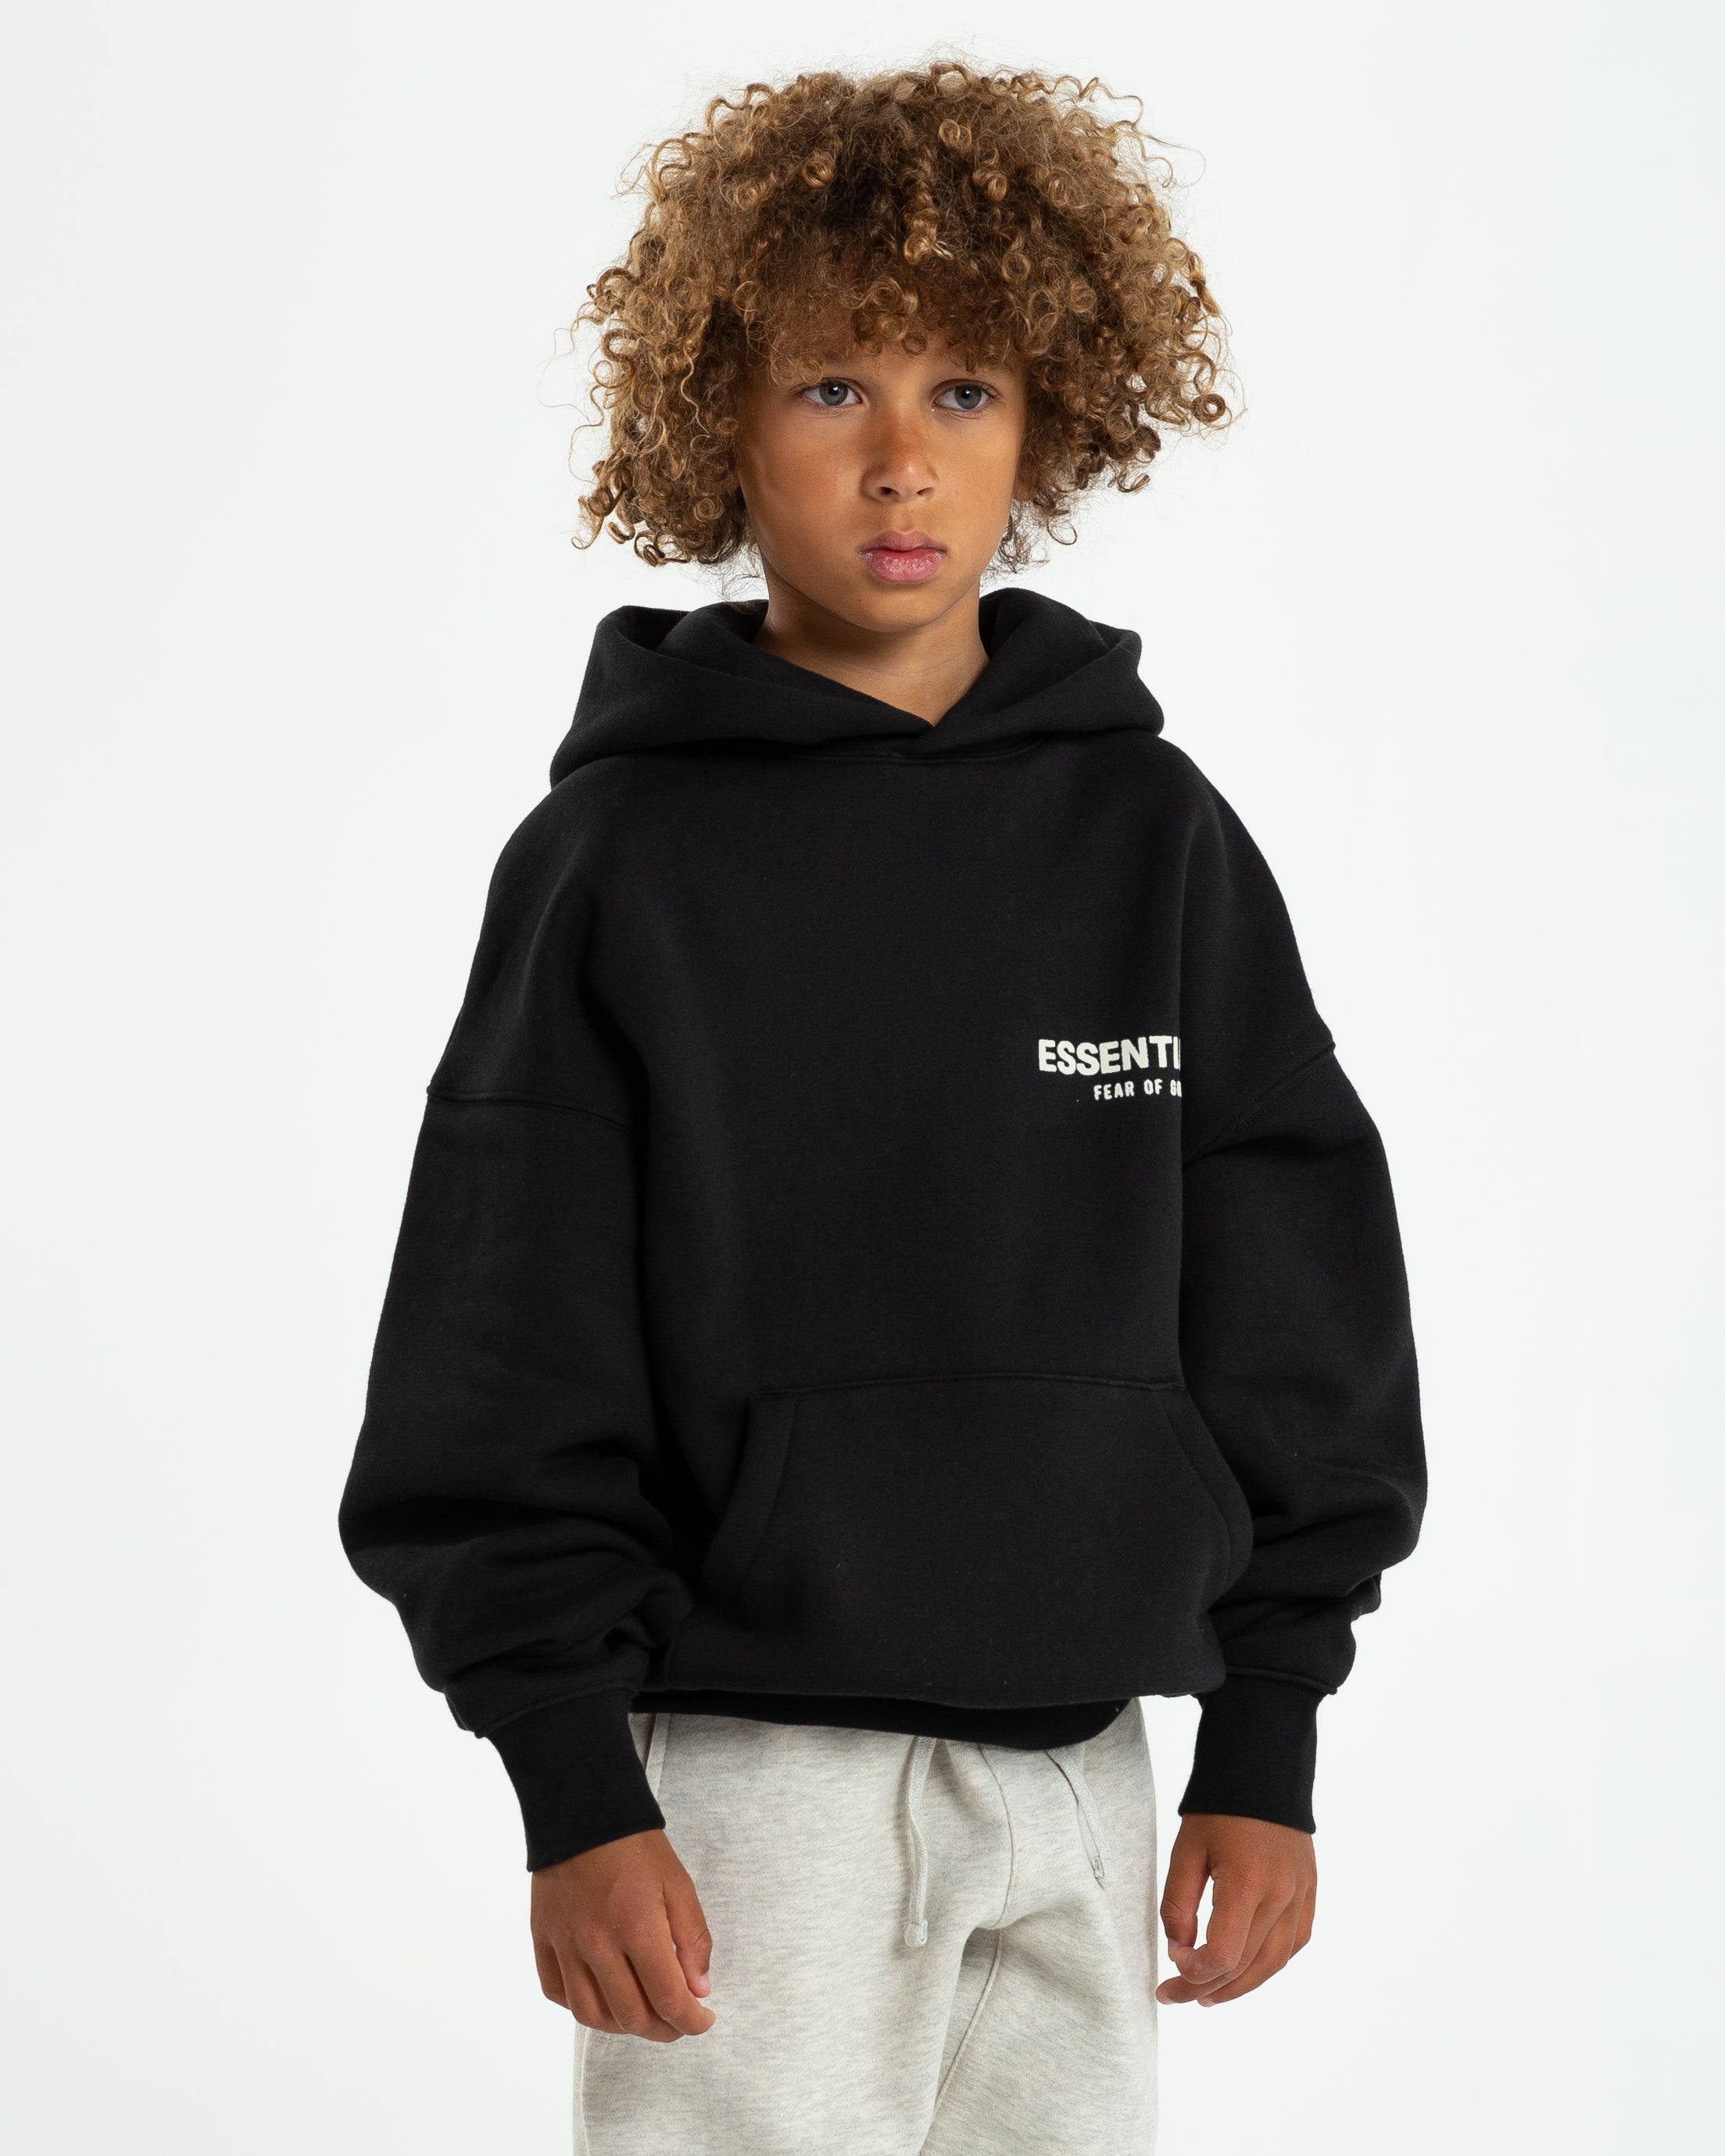 Kids' Core Collection Hoodie in Black